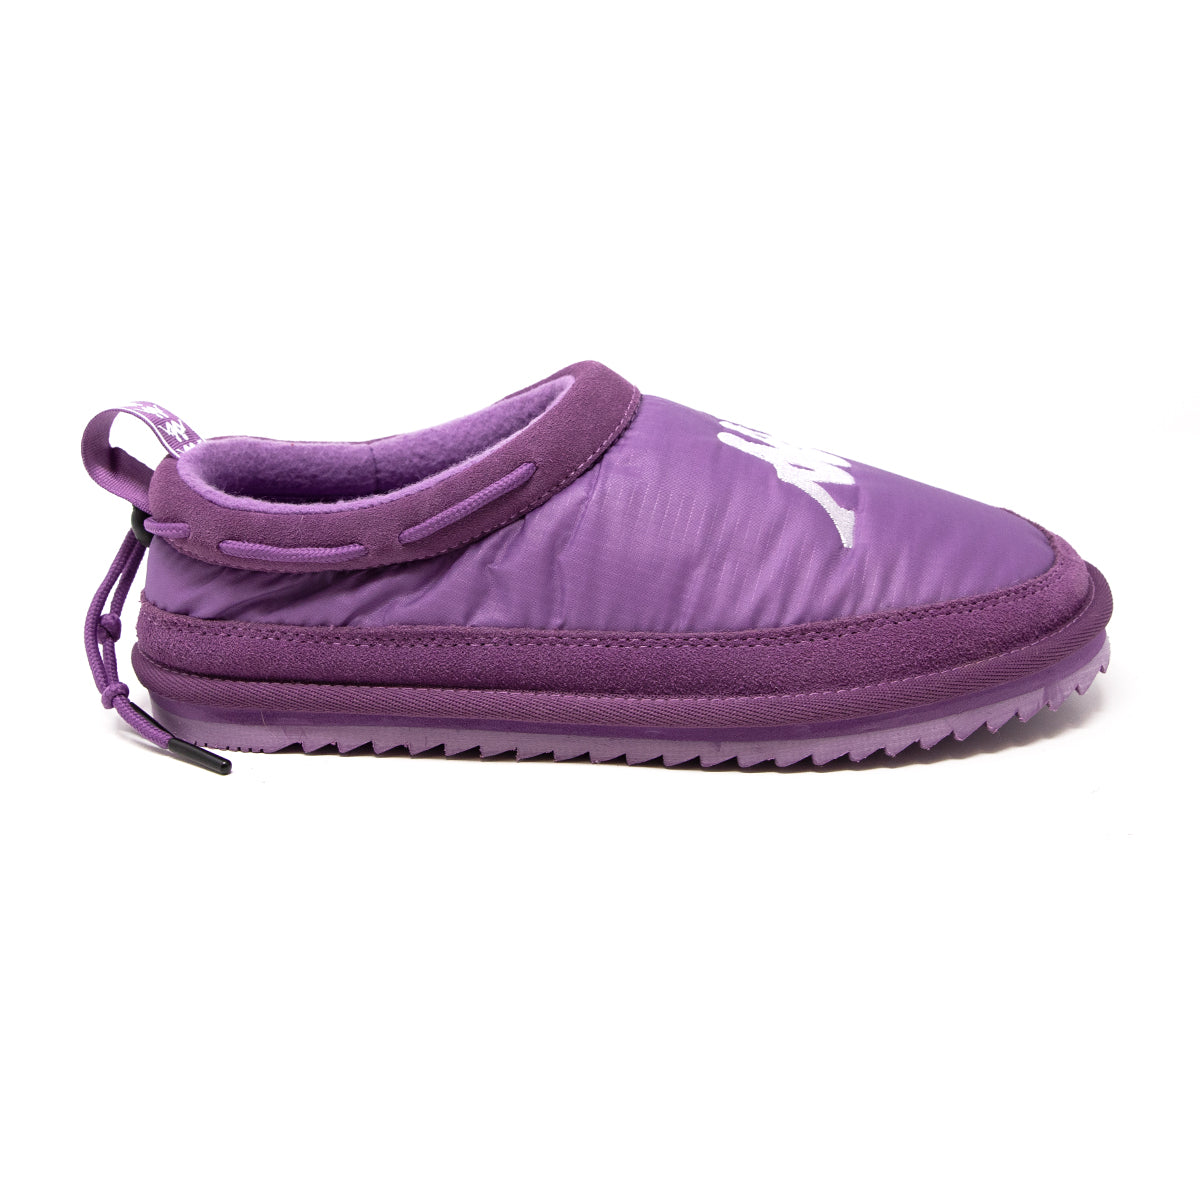 Authentic Mule 3 Mules - Violet Kappa USA